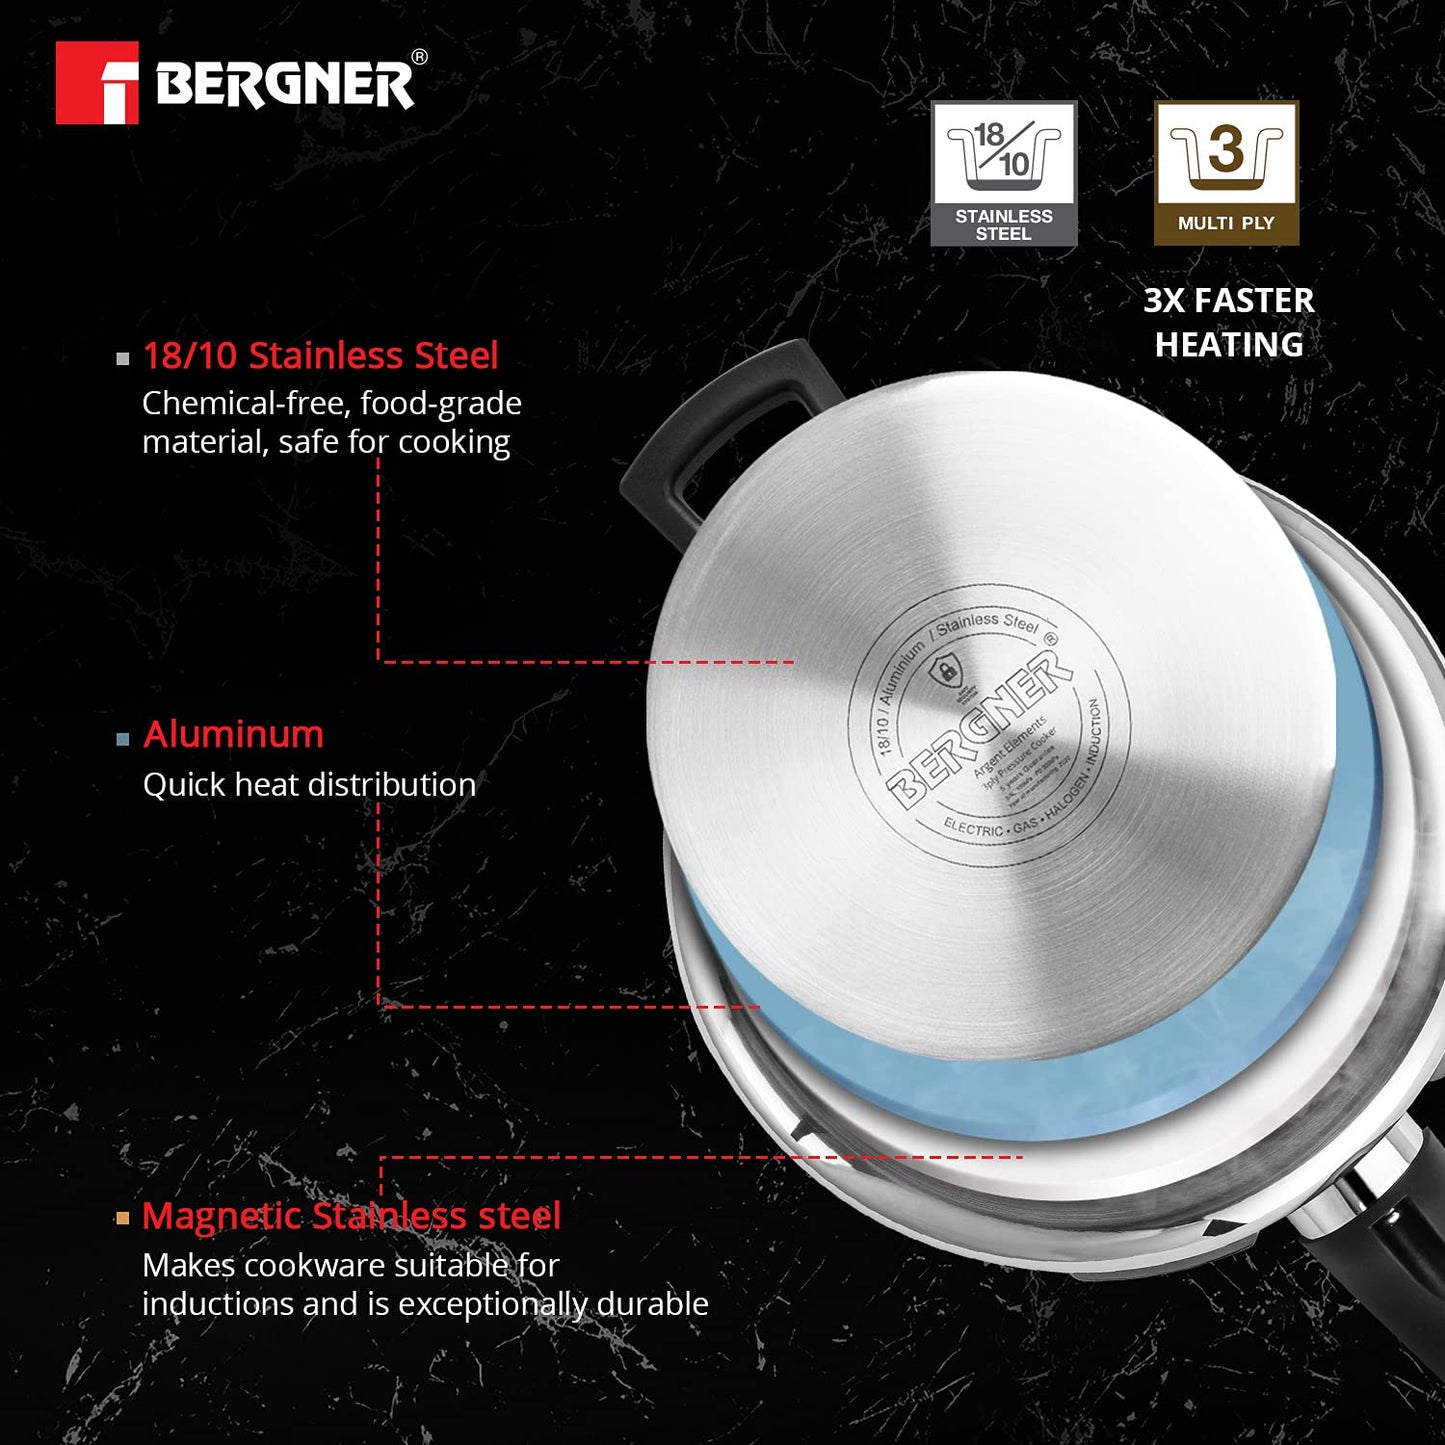 Bergner Argent Elements Tri-Ply Stainless Steel Unpressure Cooker Pan With Outer Lid (3.5 Ltrs., Silver), 3.5 Liter